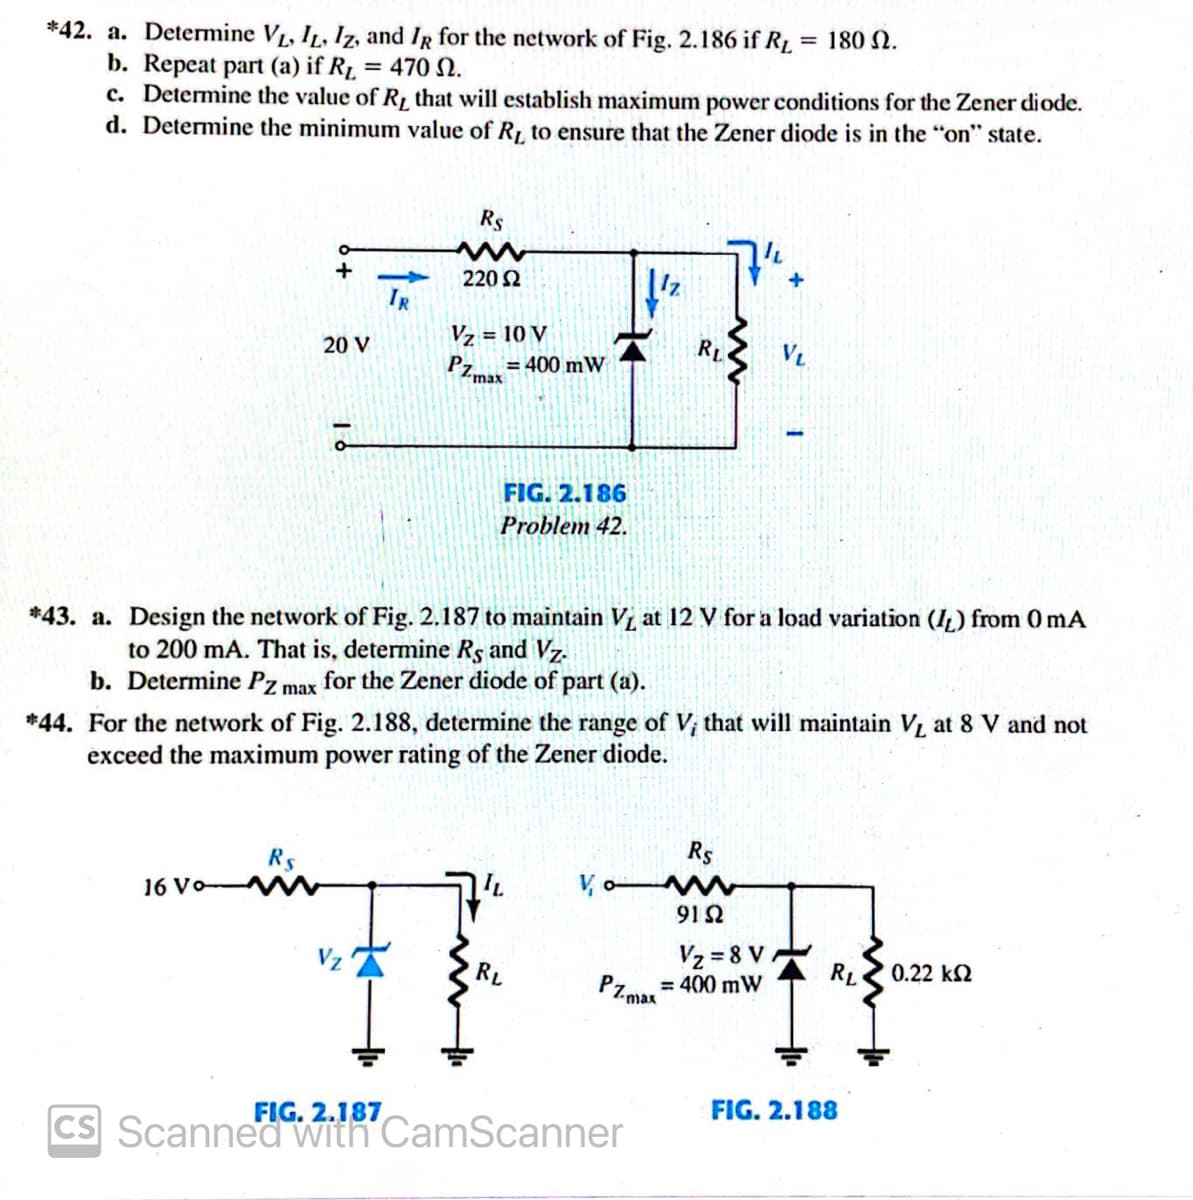 *42. a. Determine VL, IL, Iz, and IR for the network of Fig. 2.186 if R1 = 180 N.
b. Repeat part (a) if R1, = 470 N.
c. Determine the value of R, that will establish maximum power conditions for the Zener diode.
d. Determine the minimum value of R to ensure that the Zener diode is in the "on" state.
%3D
Rs
220 2
IR
Vz = 10 V
RL
VL
20 V
= 400 mW
PZmax
FIG. 2.186
Problem 42.
*43. a. Design the network of Fig. 2.187 to maintain Vi at 12 V for a load variation (I,) from 0 mA
to 200 mA. That is, determine Rs and Vz.
b. Determine Pz max for the Zener diode of part (a).
*44. For the network of Fig. 2.188, determine the range of Vị that will maintain V, at 8 V and not
exceed the maximum power rating of the Zener diode.
Rs
Rs
V, o w
91 2
16 Vo
Vz = 8 V
0.22 k2
Vz
RL
= 400 mW
PZ max
RL
FIG. 2.188
FIG. 2.187
CS Scanned with CamScanner
